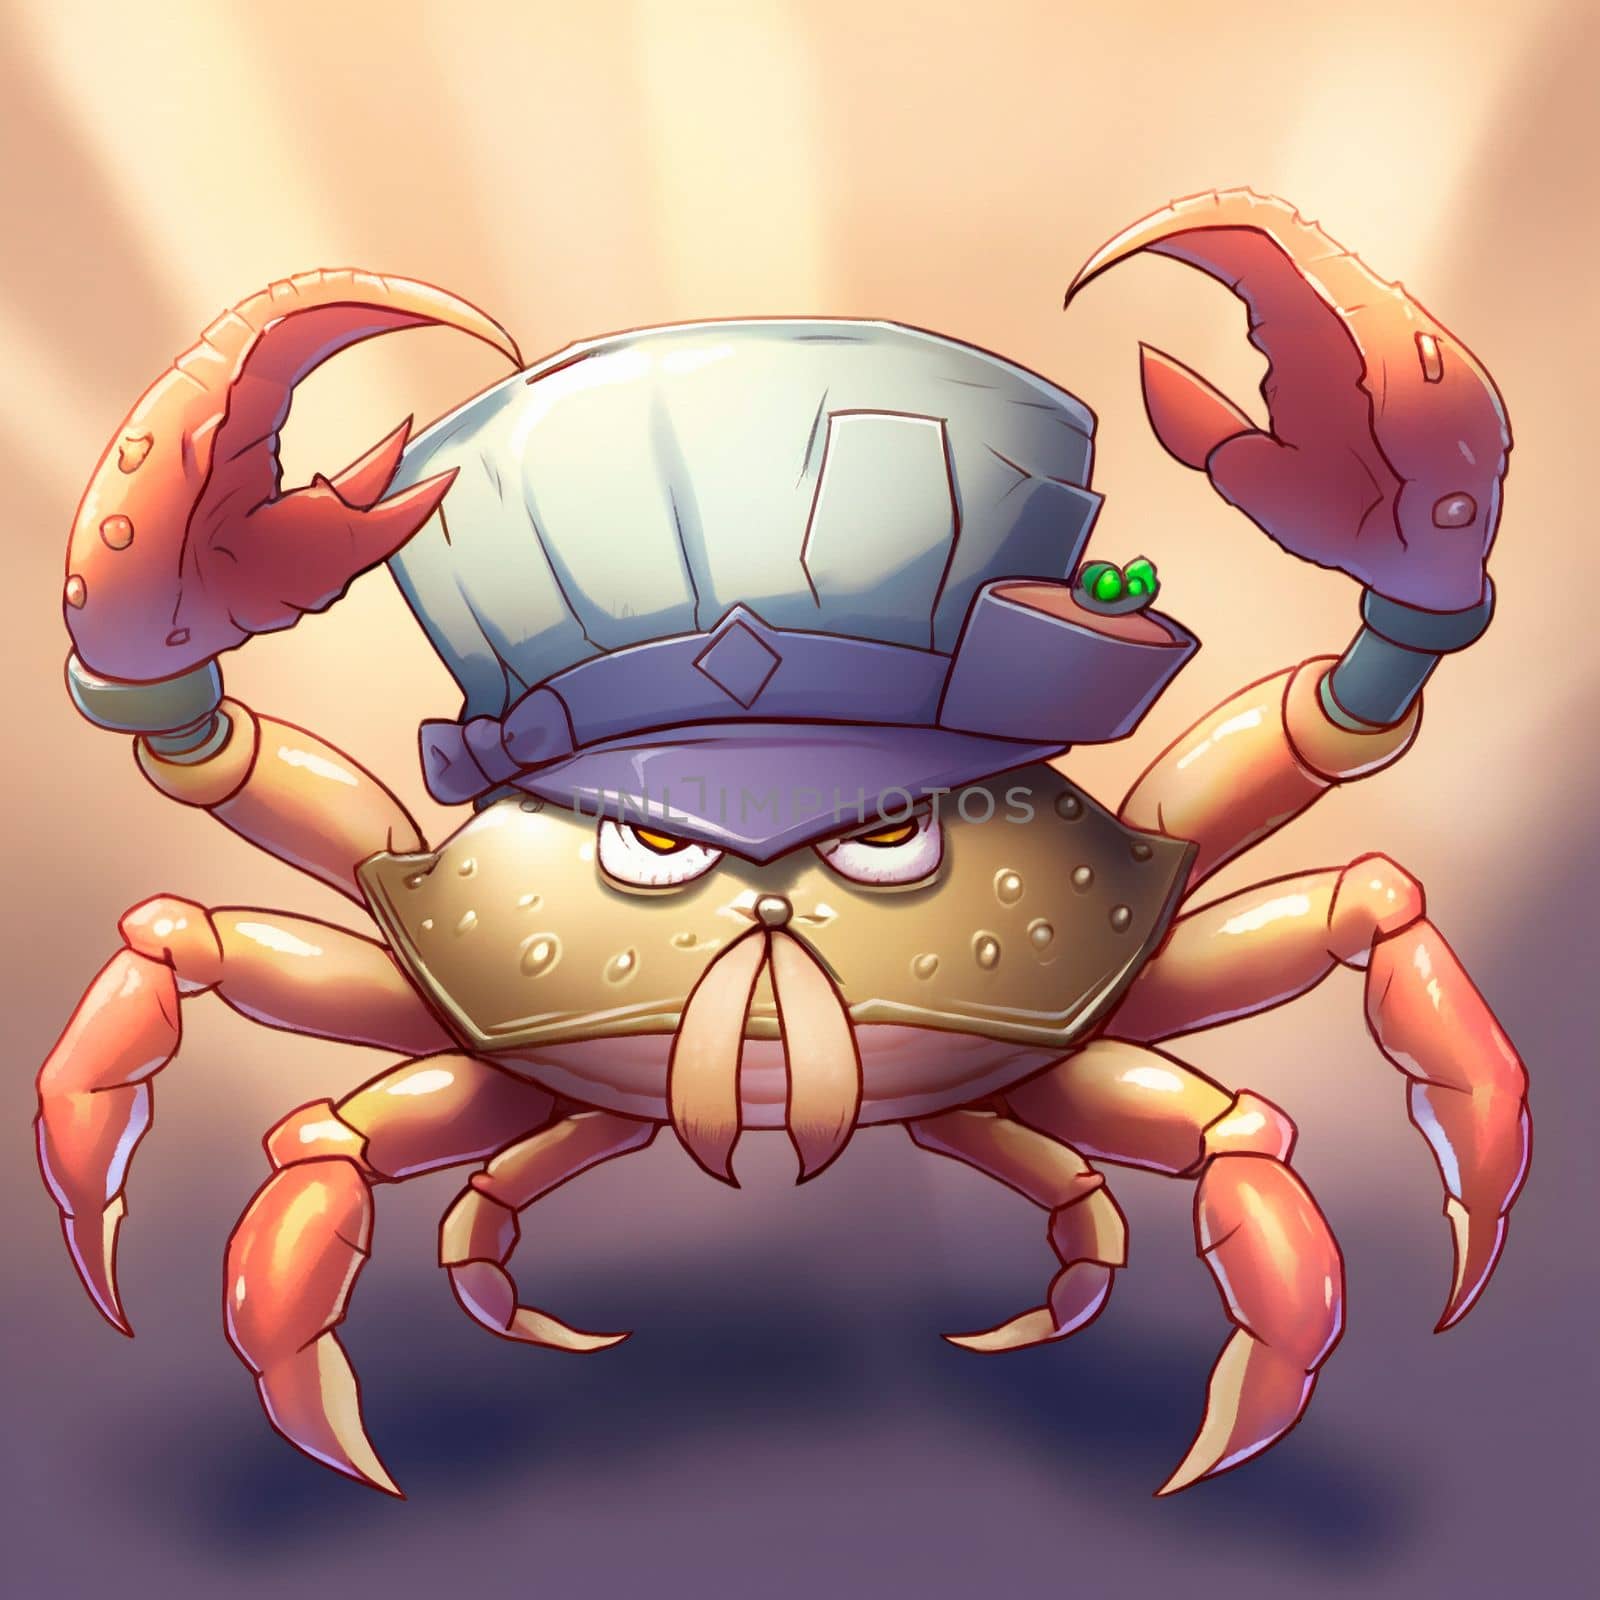 Crab in a hat by NeuroSky